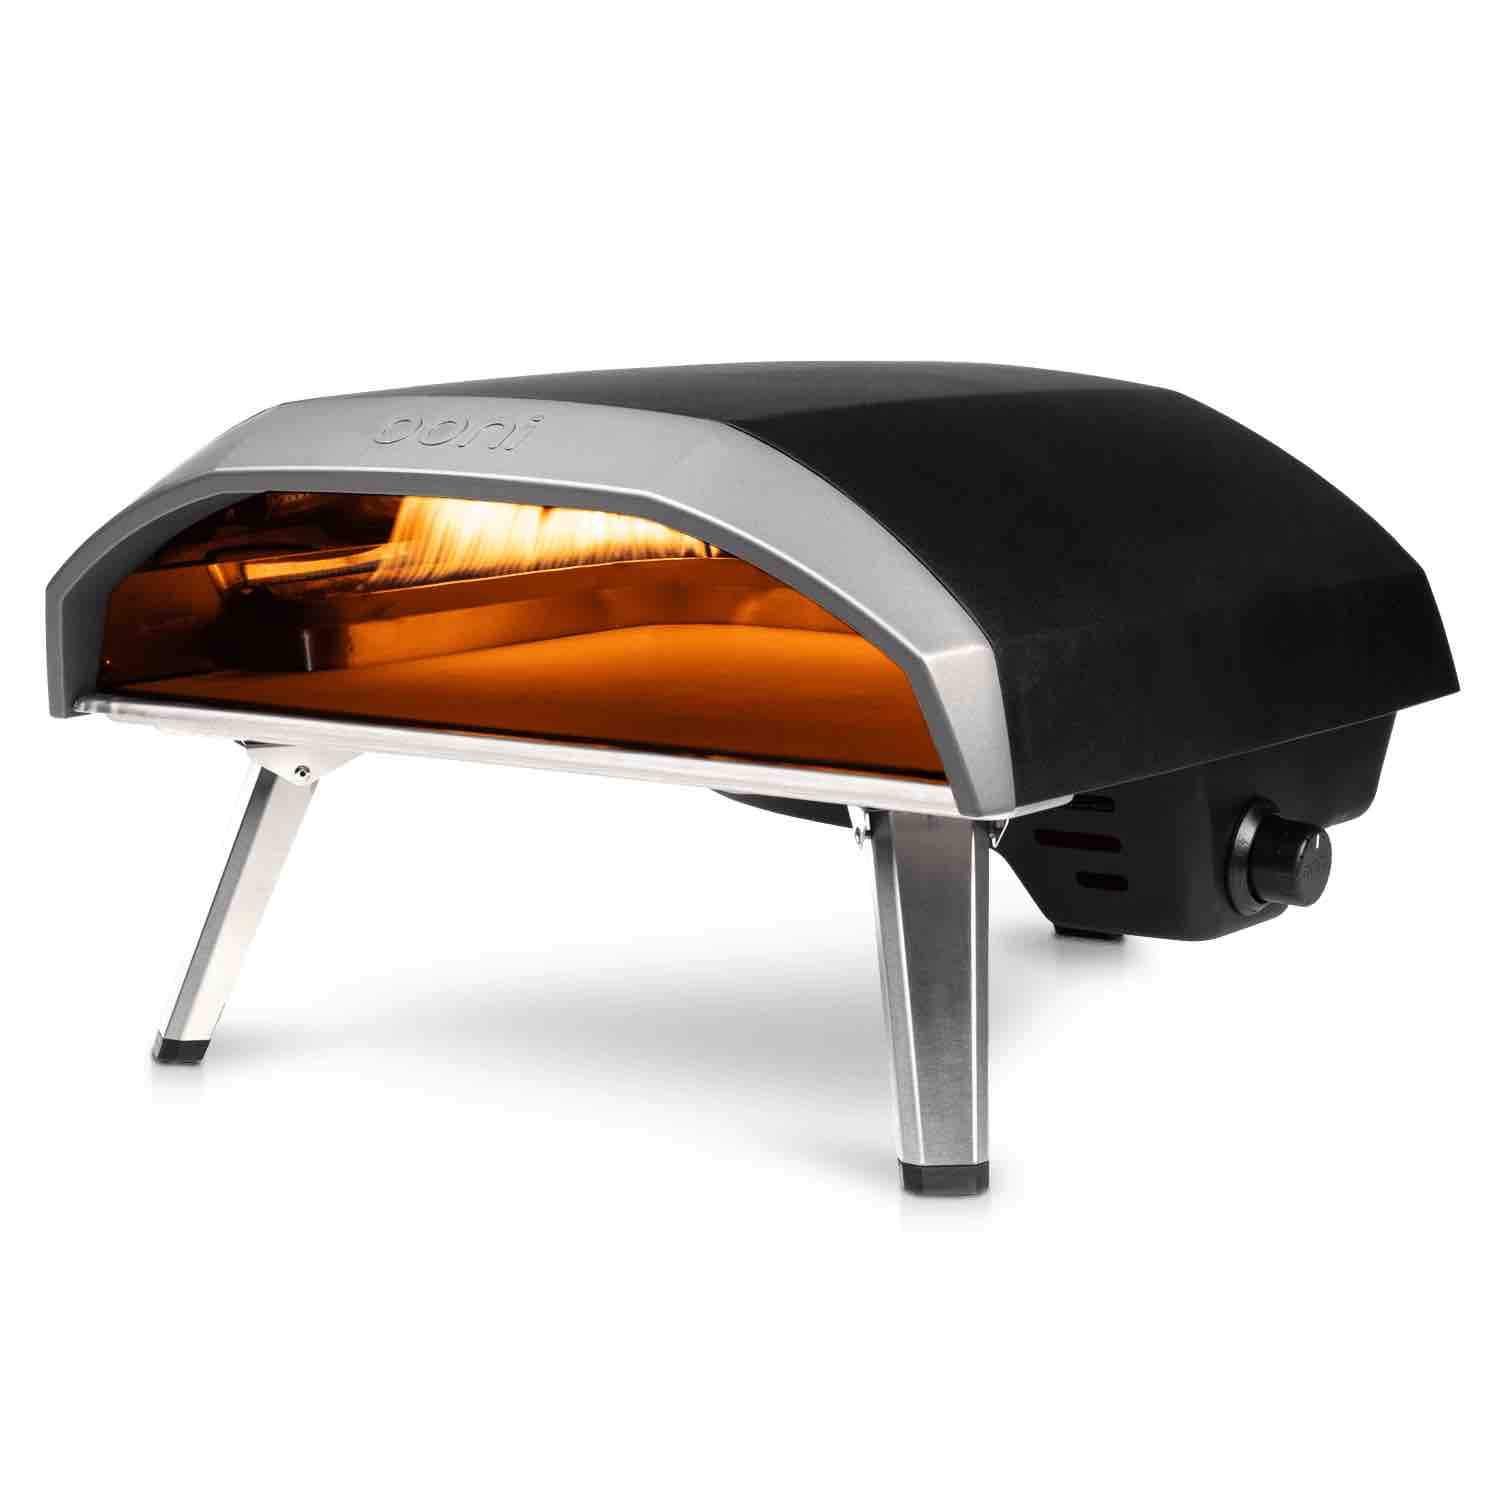 a black and silver outdoor oven with a yellow light